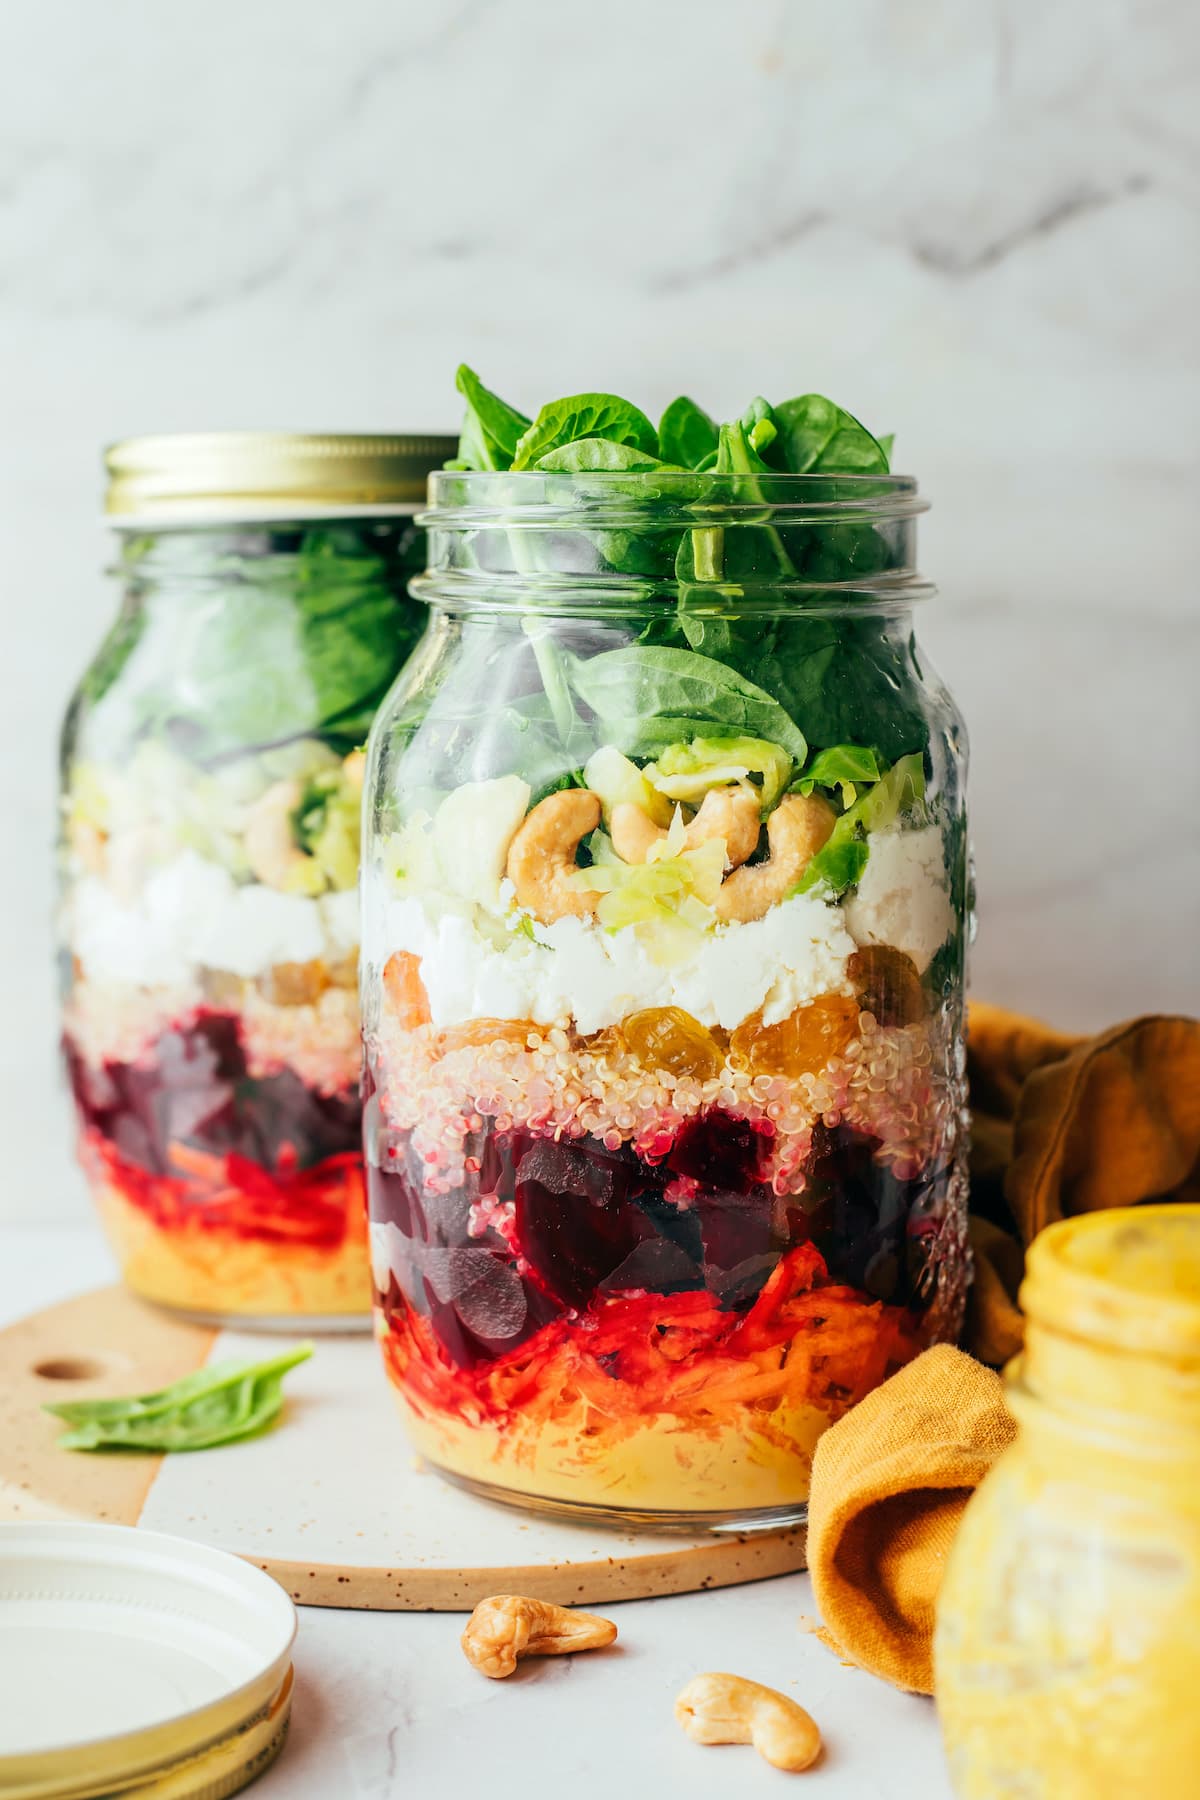 How to Pack a Salad in a Jar + 21 Stunning Recipes